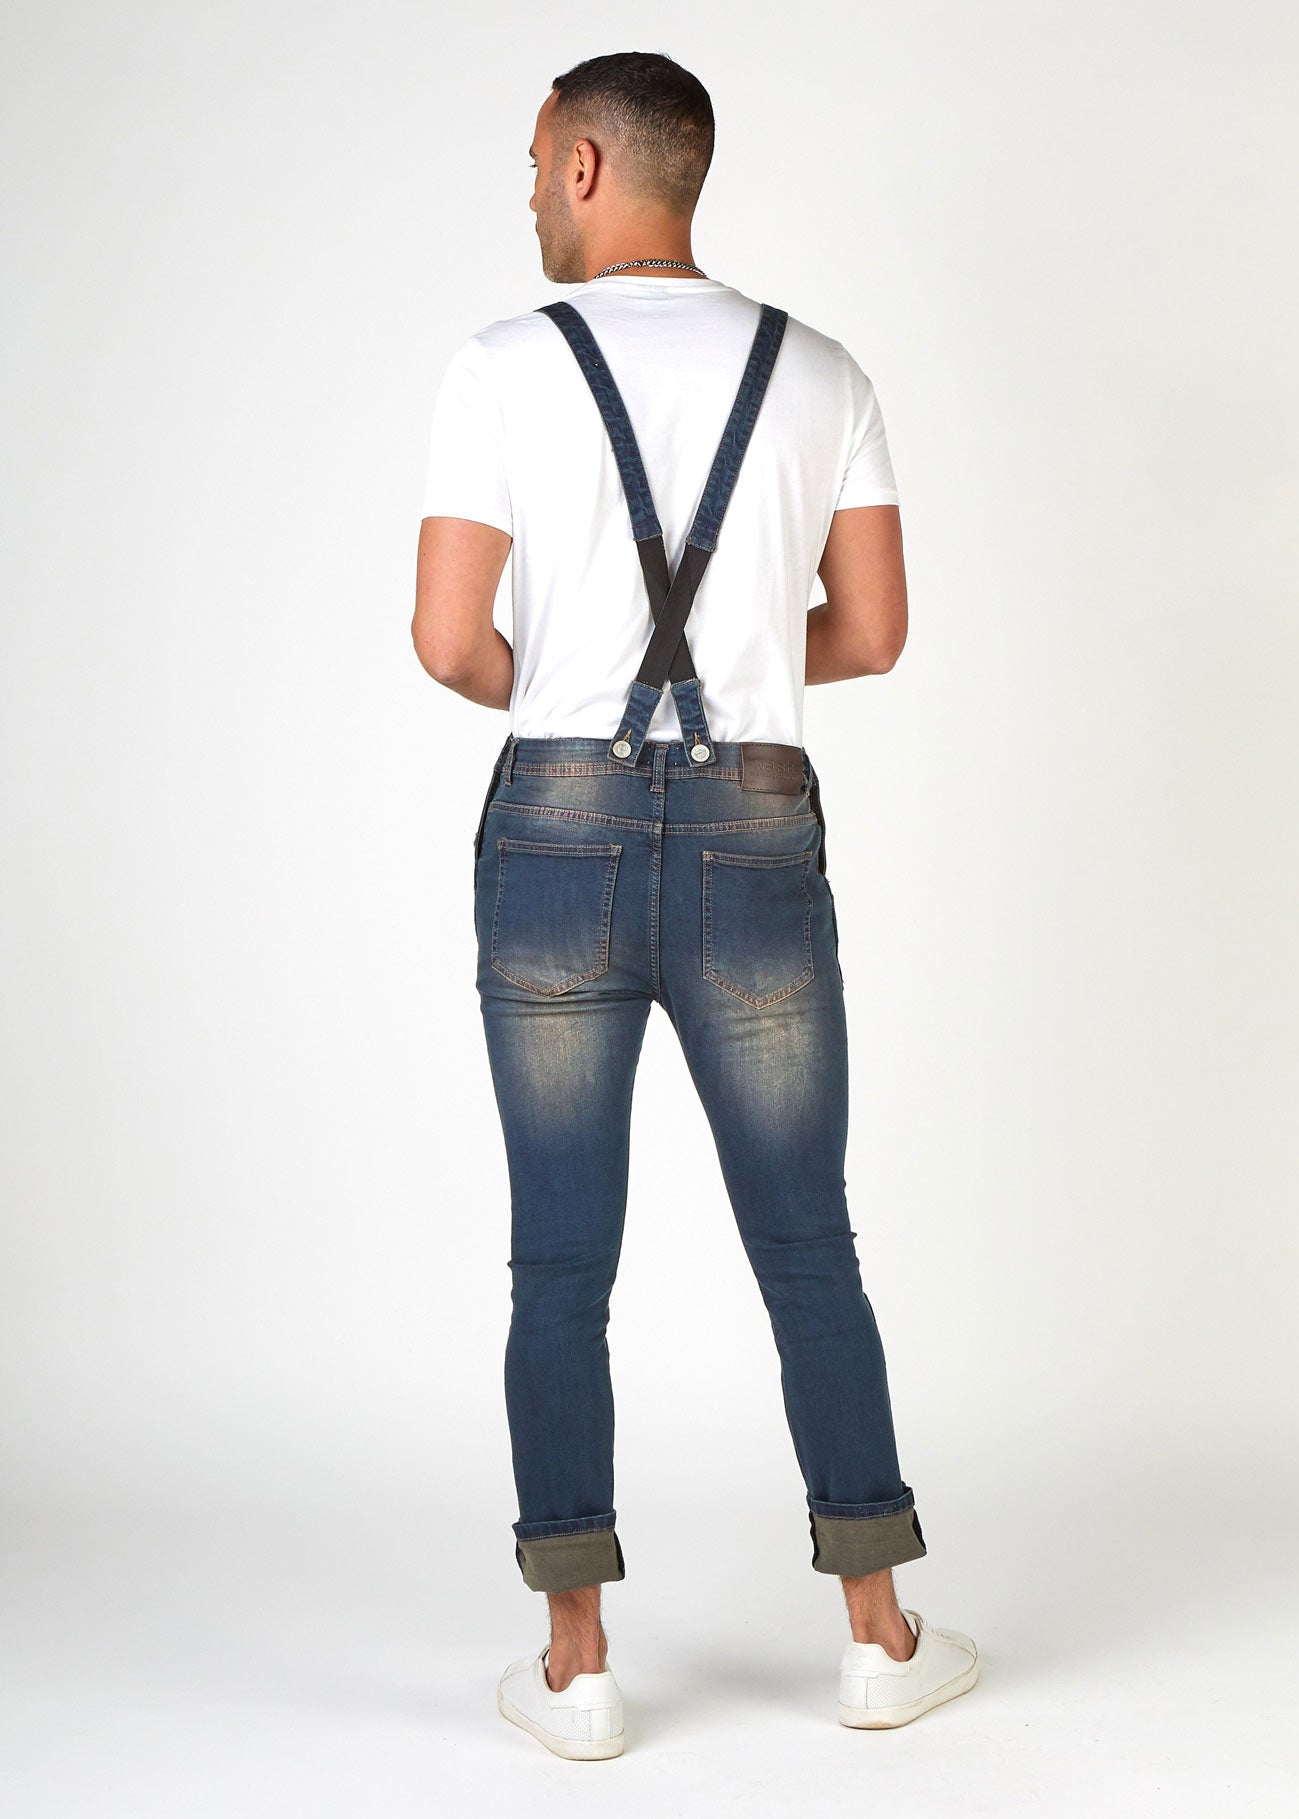 Full, slightly angled rear pose wearing versatile, Brooklands style bib overalls with turn-ups. Clearly showing adjustable & detachable straps.